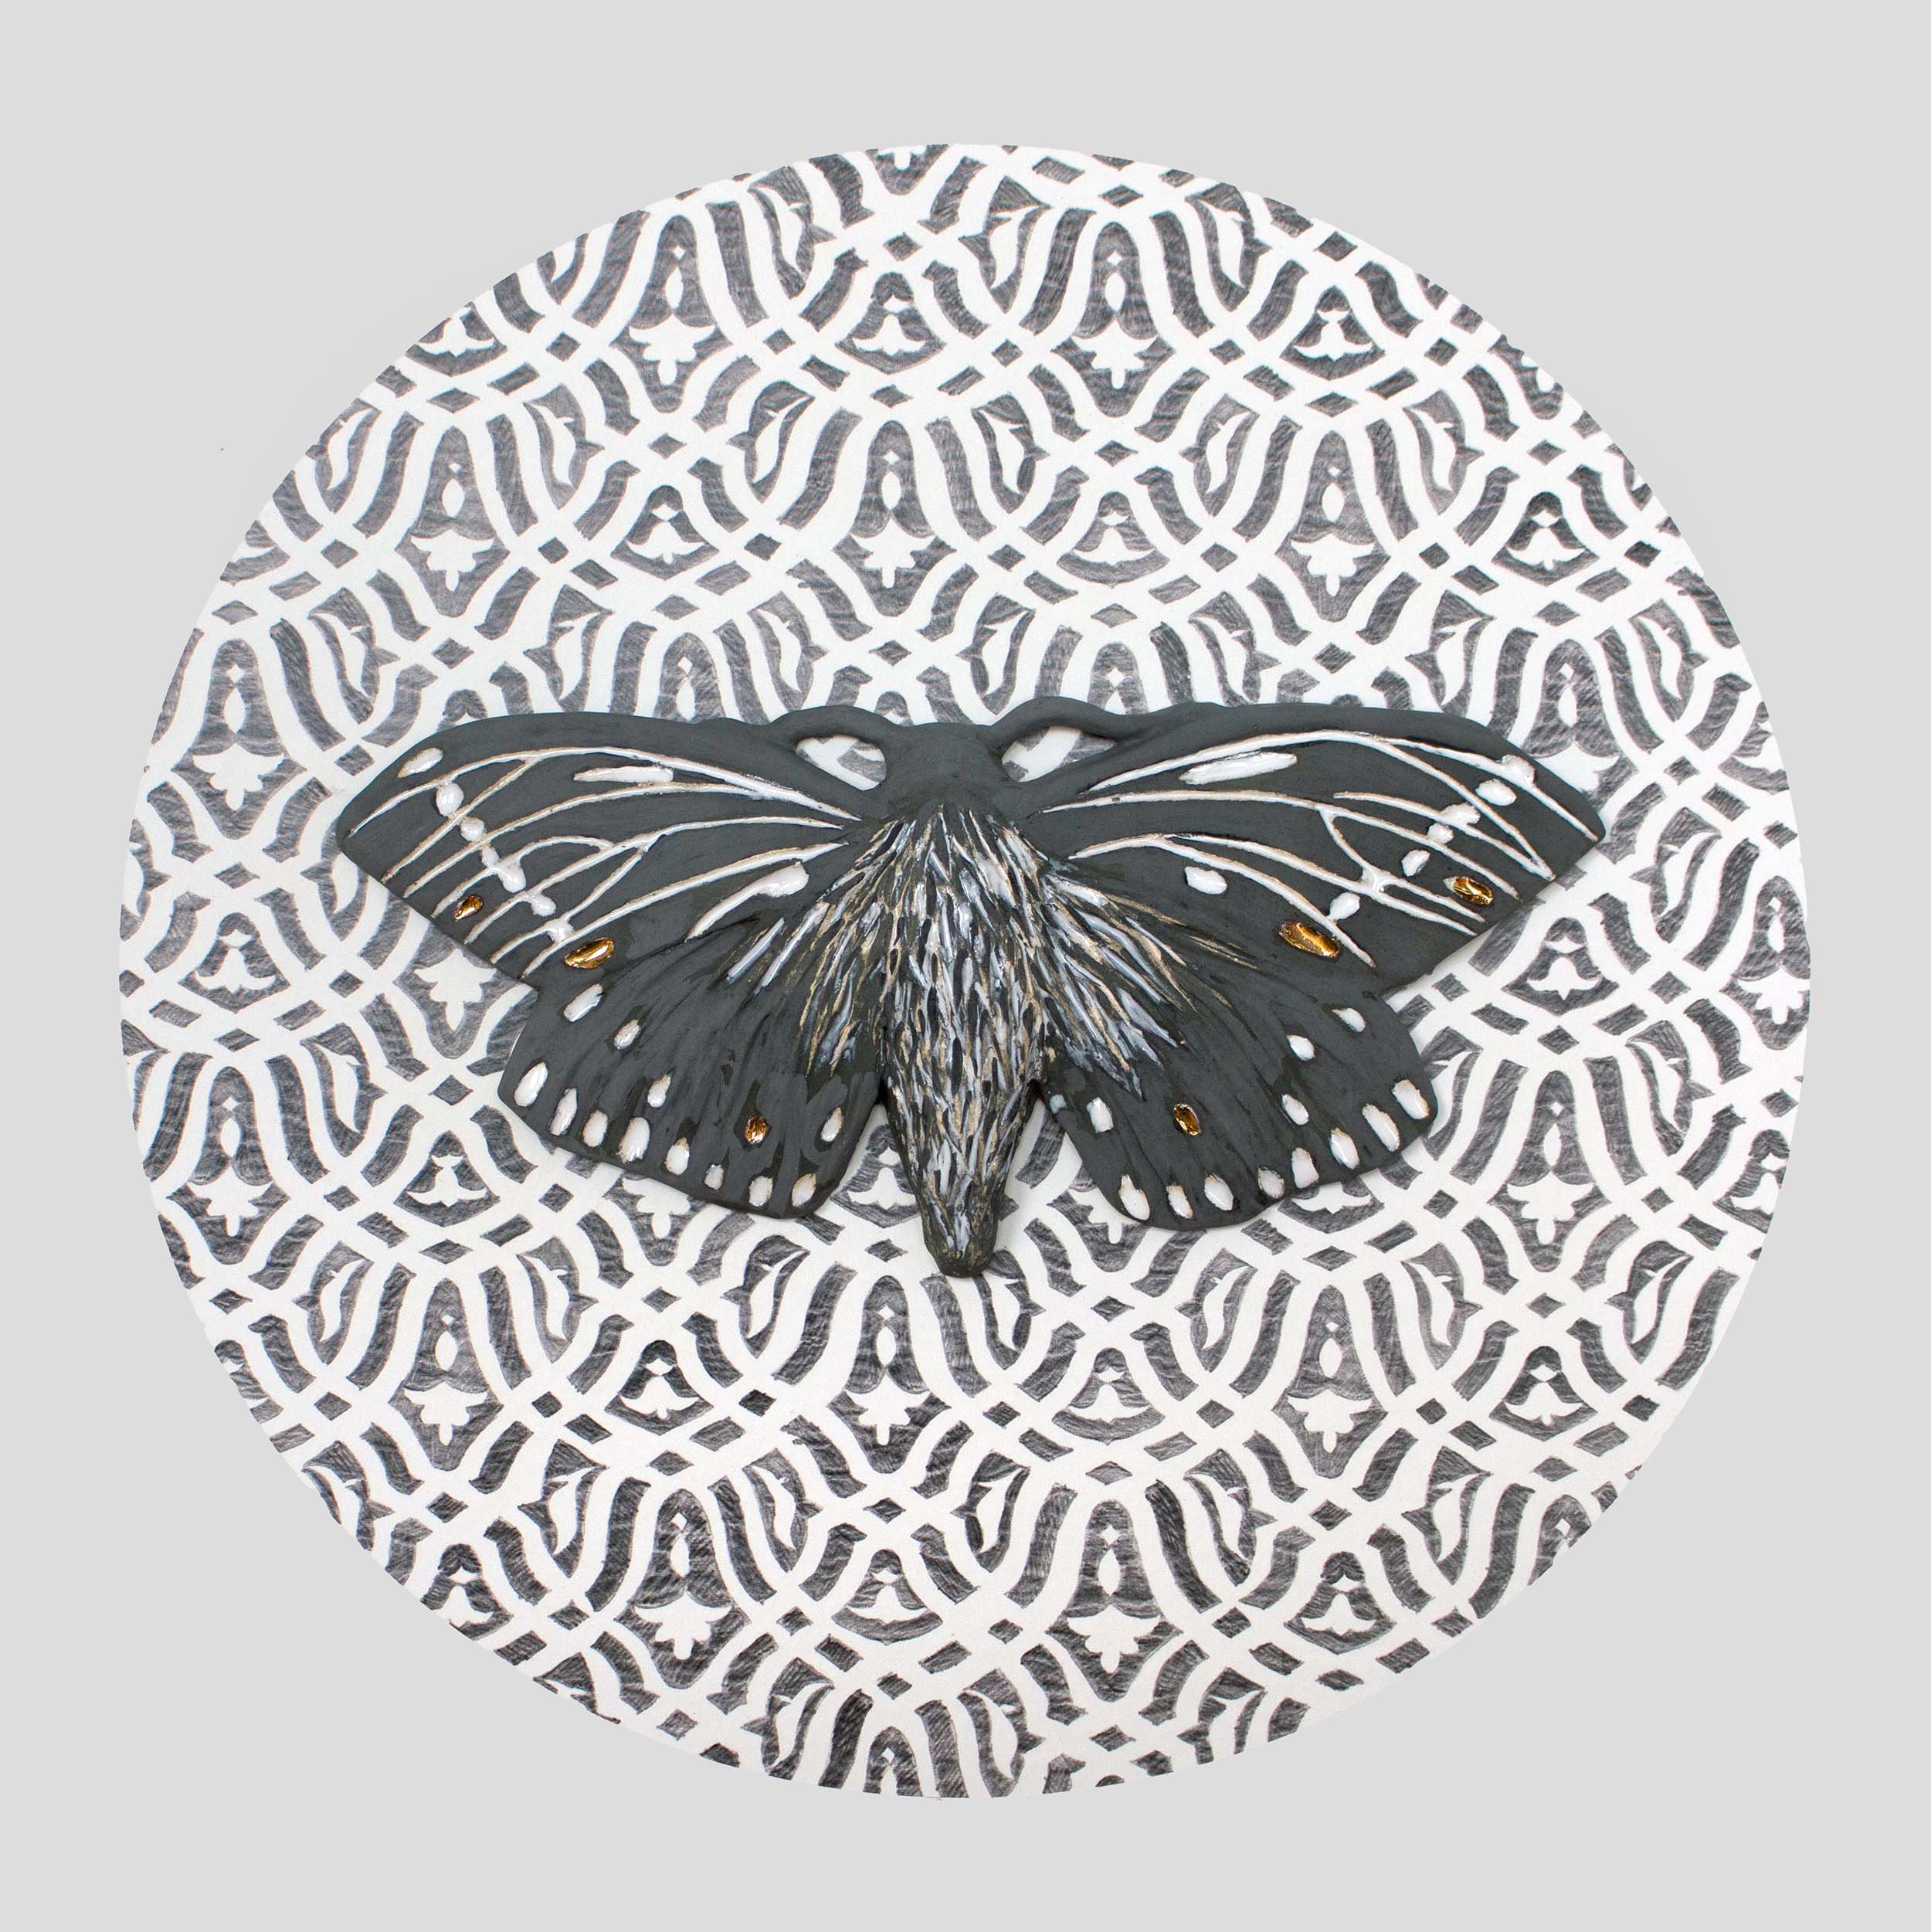   Moth 03,  ceramic moth mounted on wallpaper backdrop, 11.5”x11.5”x.5”, available 